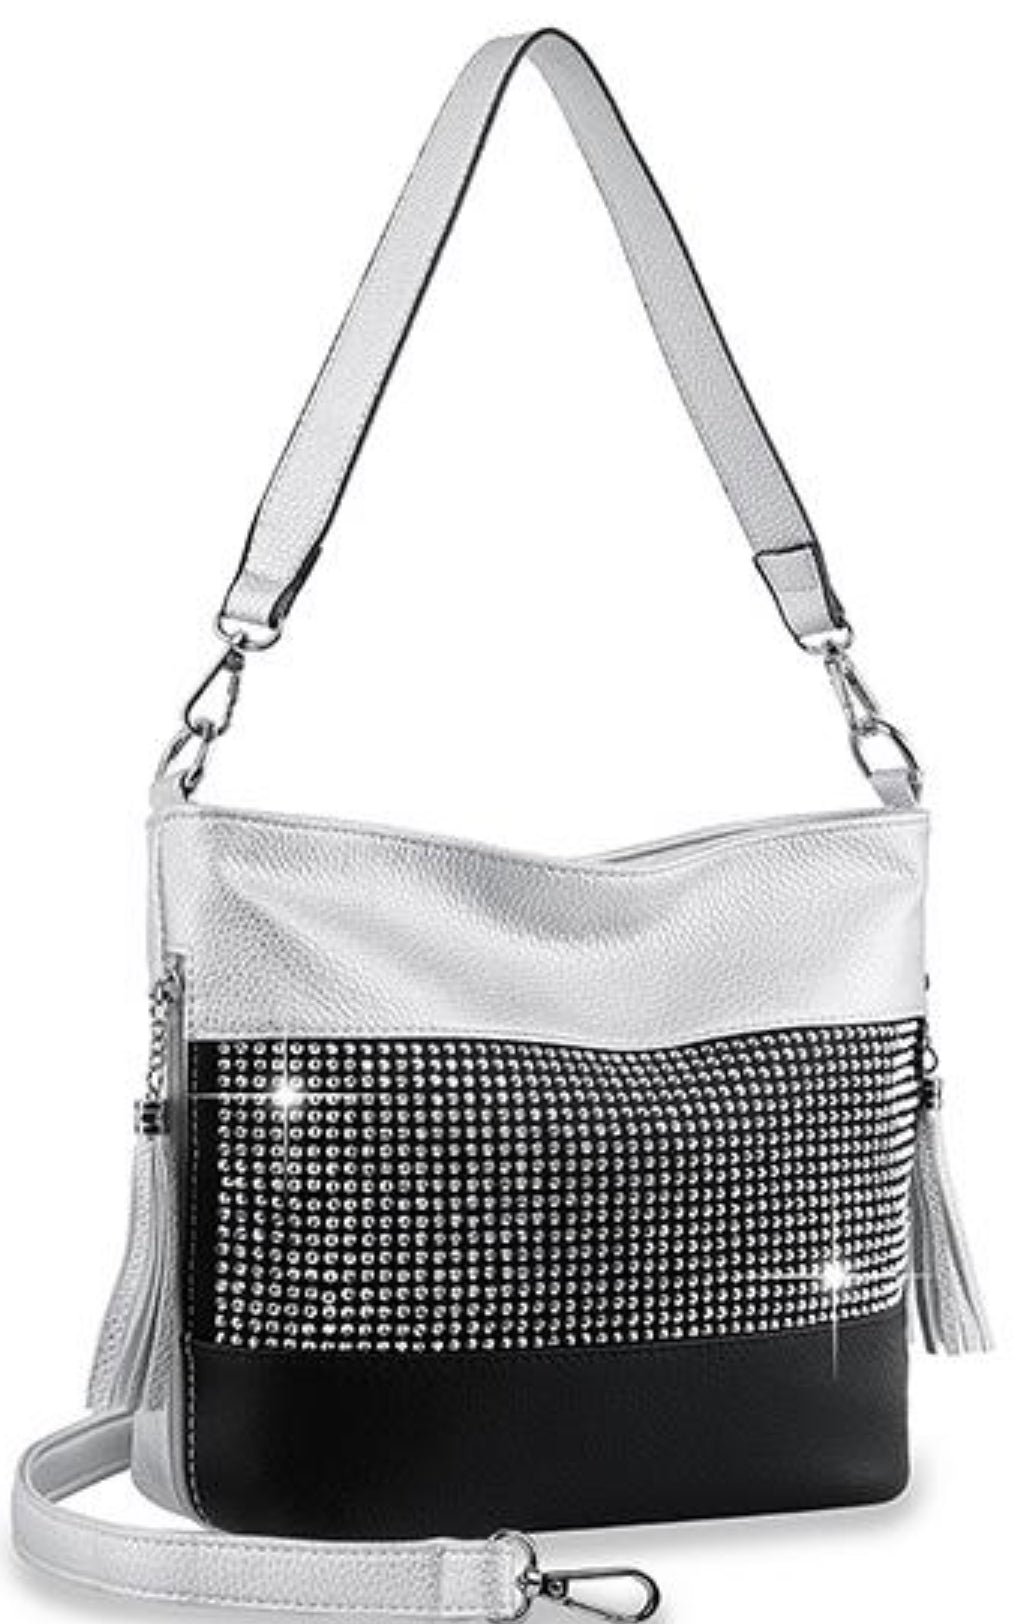 Silver and black bling purse